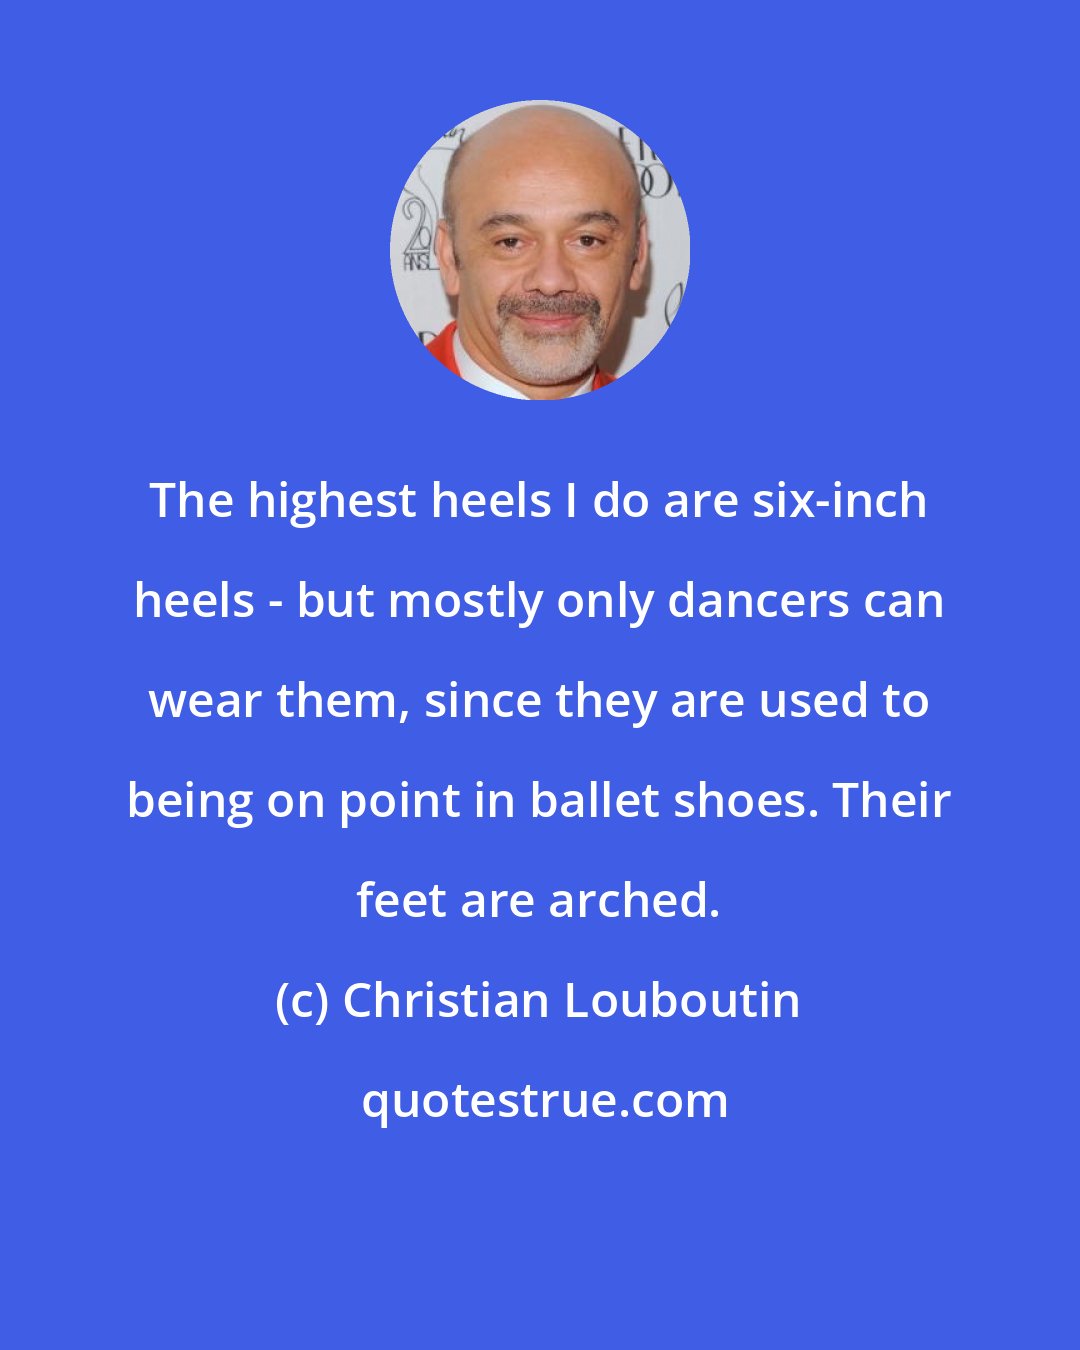 Christian Louboutin: The highest heels I do are six-inch heels - but mostly only dancers can wear them, since they are used to being on point in ballet shoes. Their feet are arched.